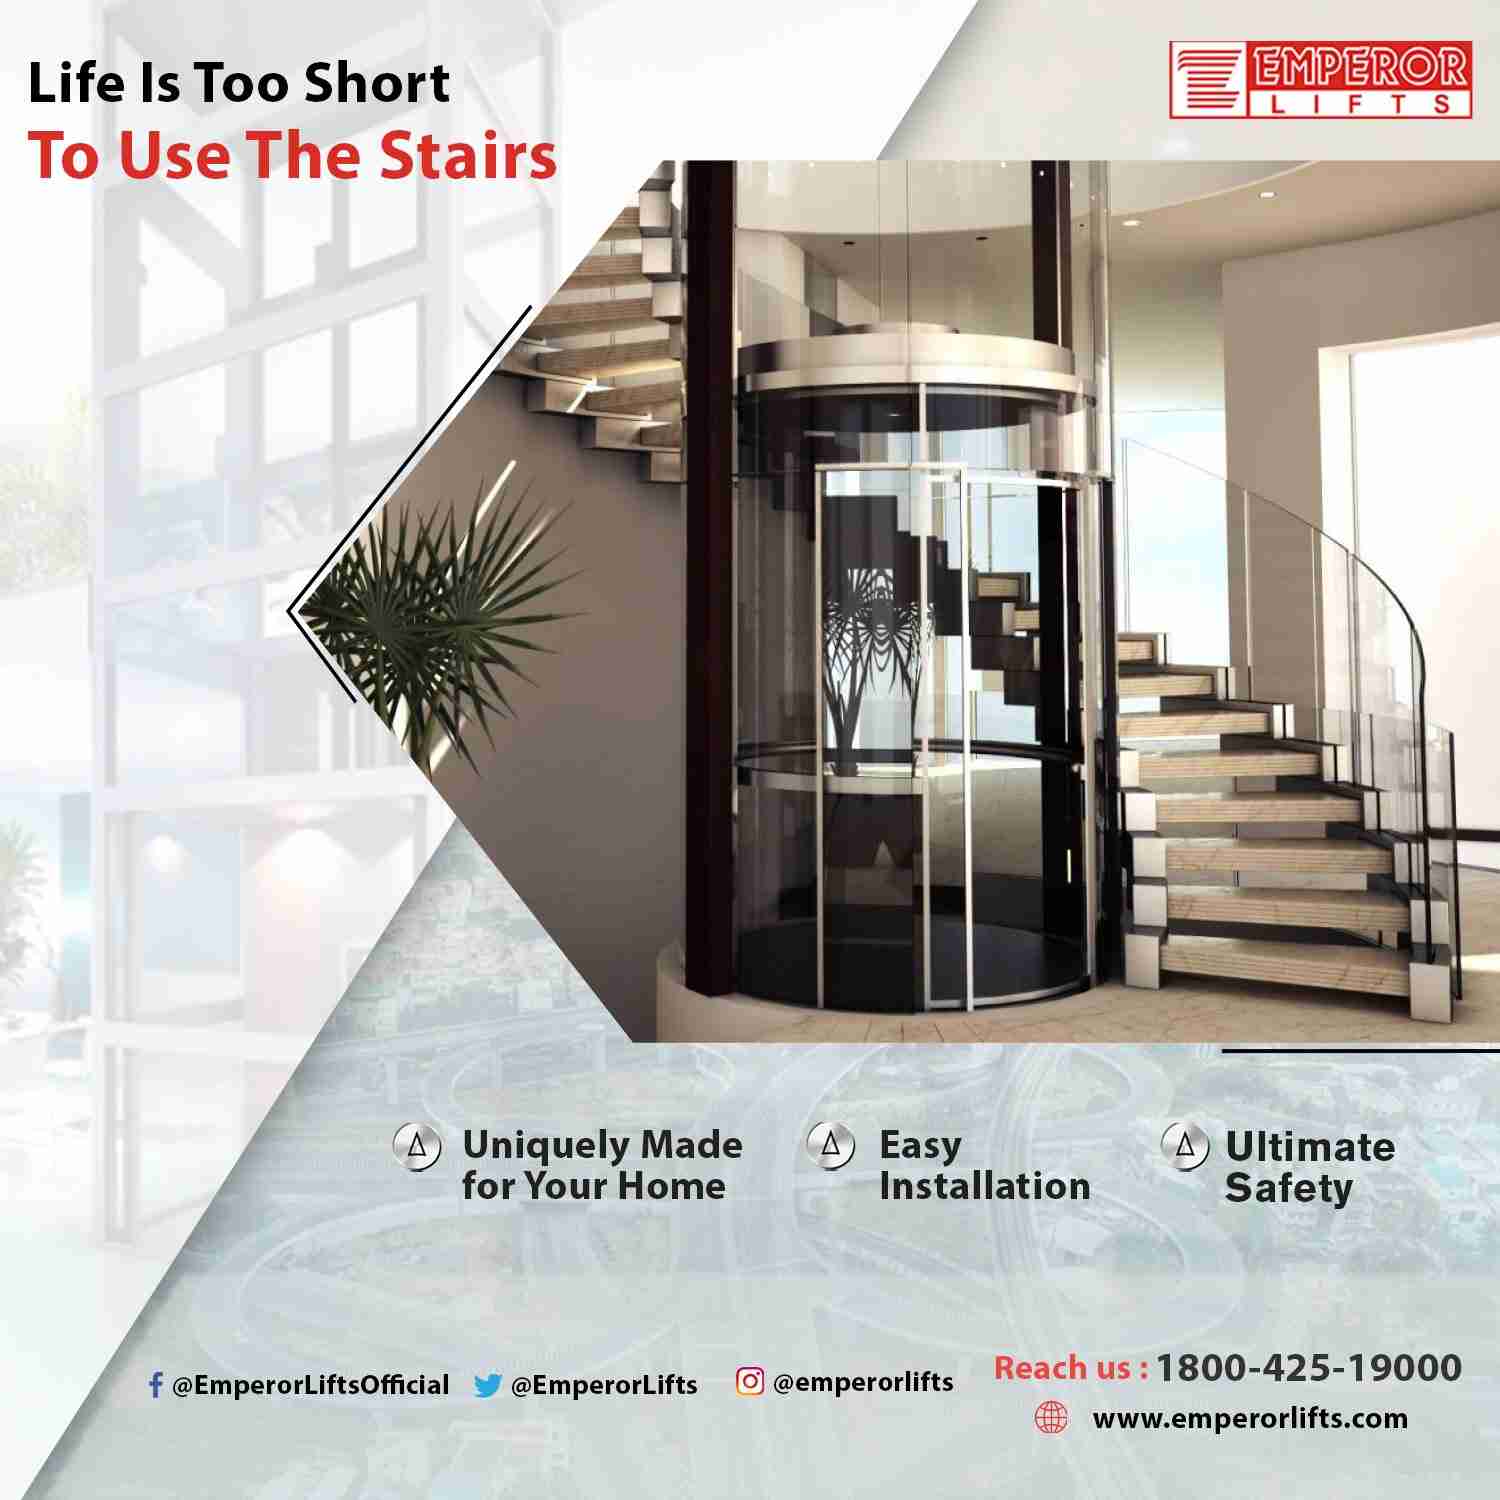 Hydraulic home lifts